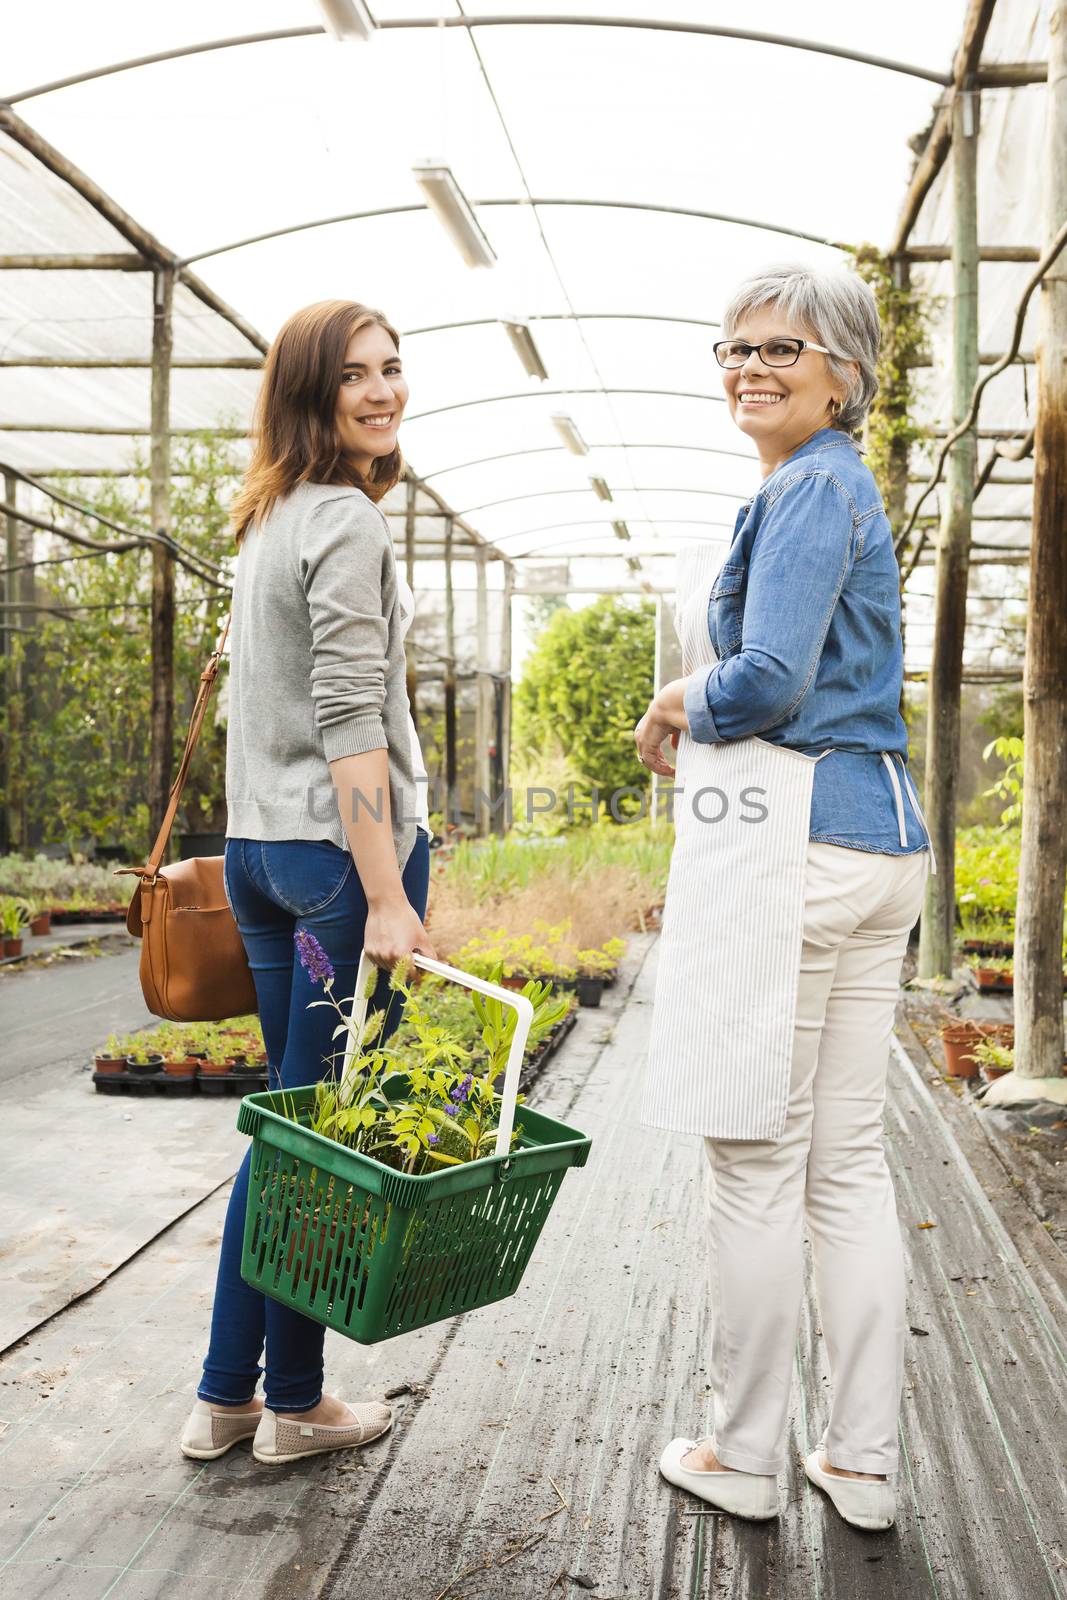 Florist and customer walking together in a greenhouse